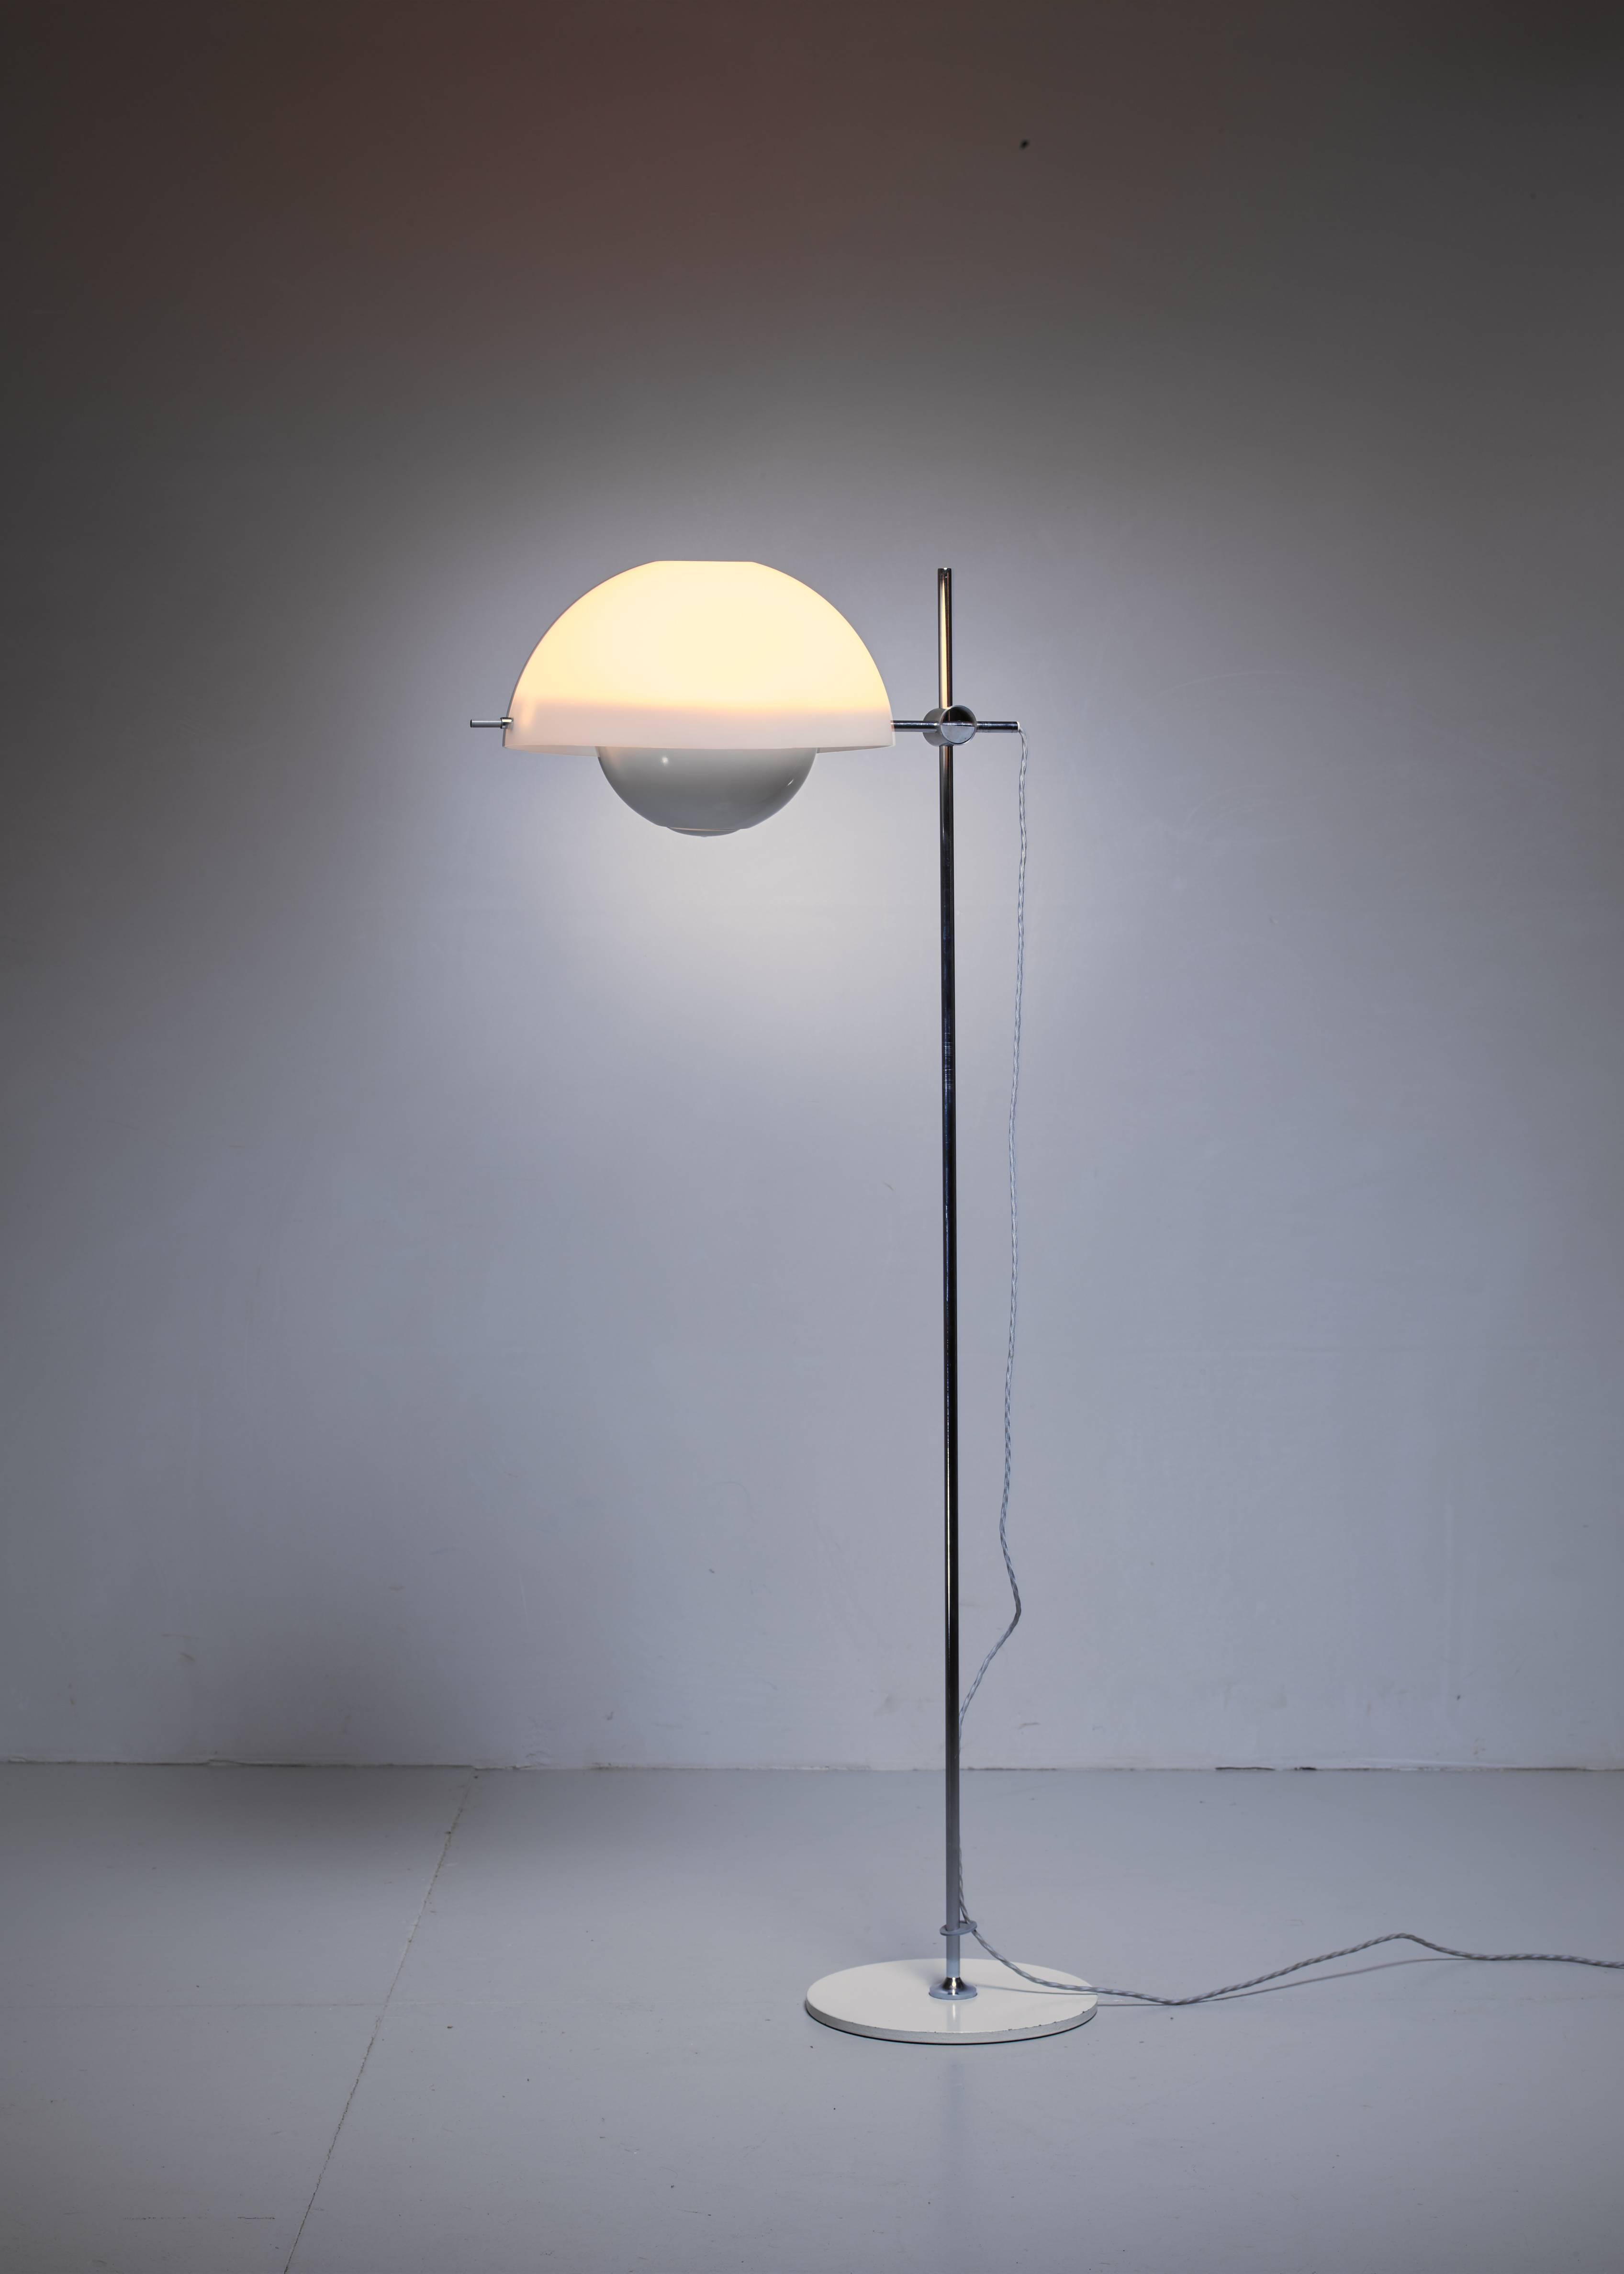 A rare, height-adjustable type 300 floor lamp by Rico & Rosemarie Baltensweiler. The lamp is made of a stainless steel frame with a white plastic hood. The hood is rotatable and has two lightbulbs inside.

A beautiful detail is the light switch that